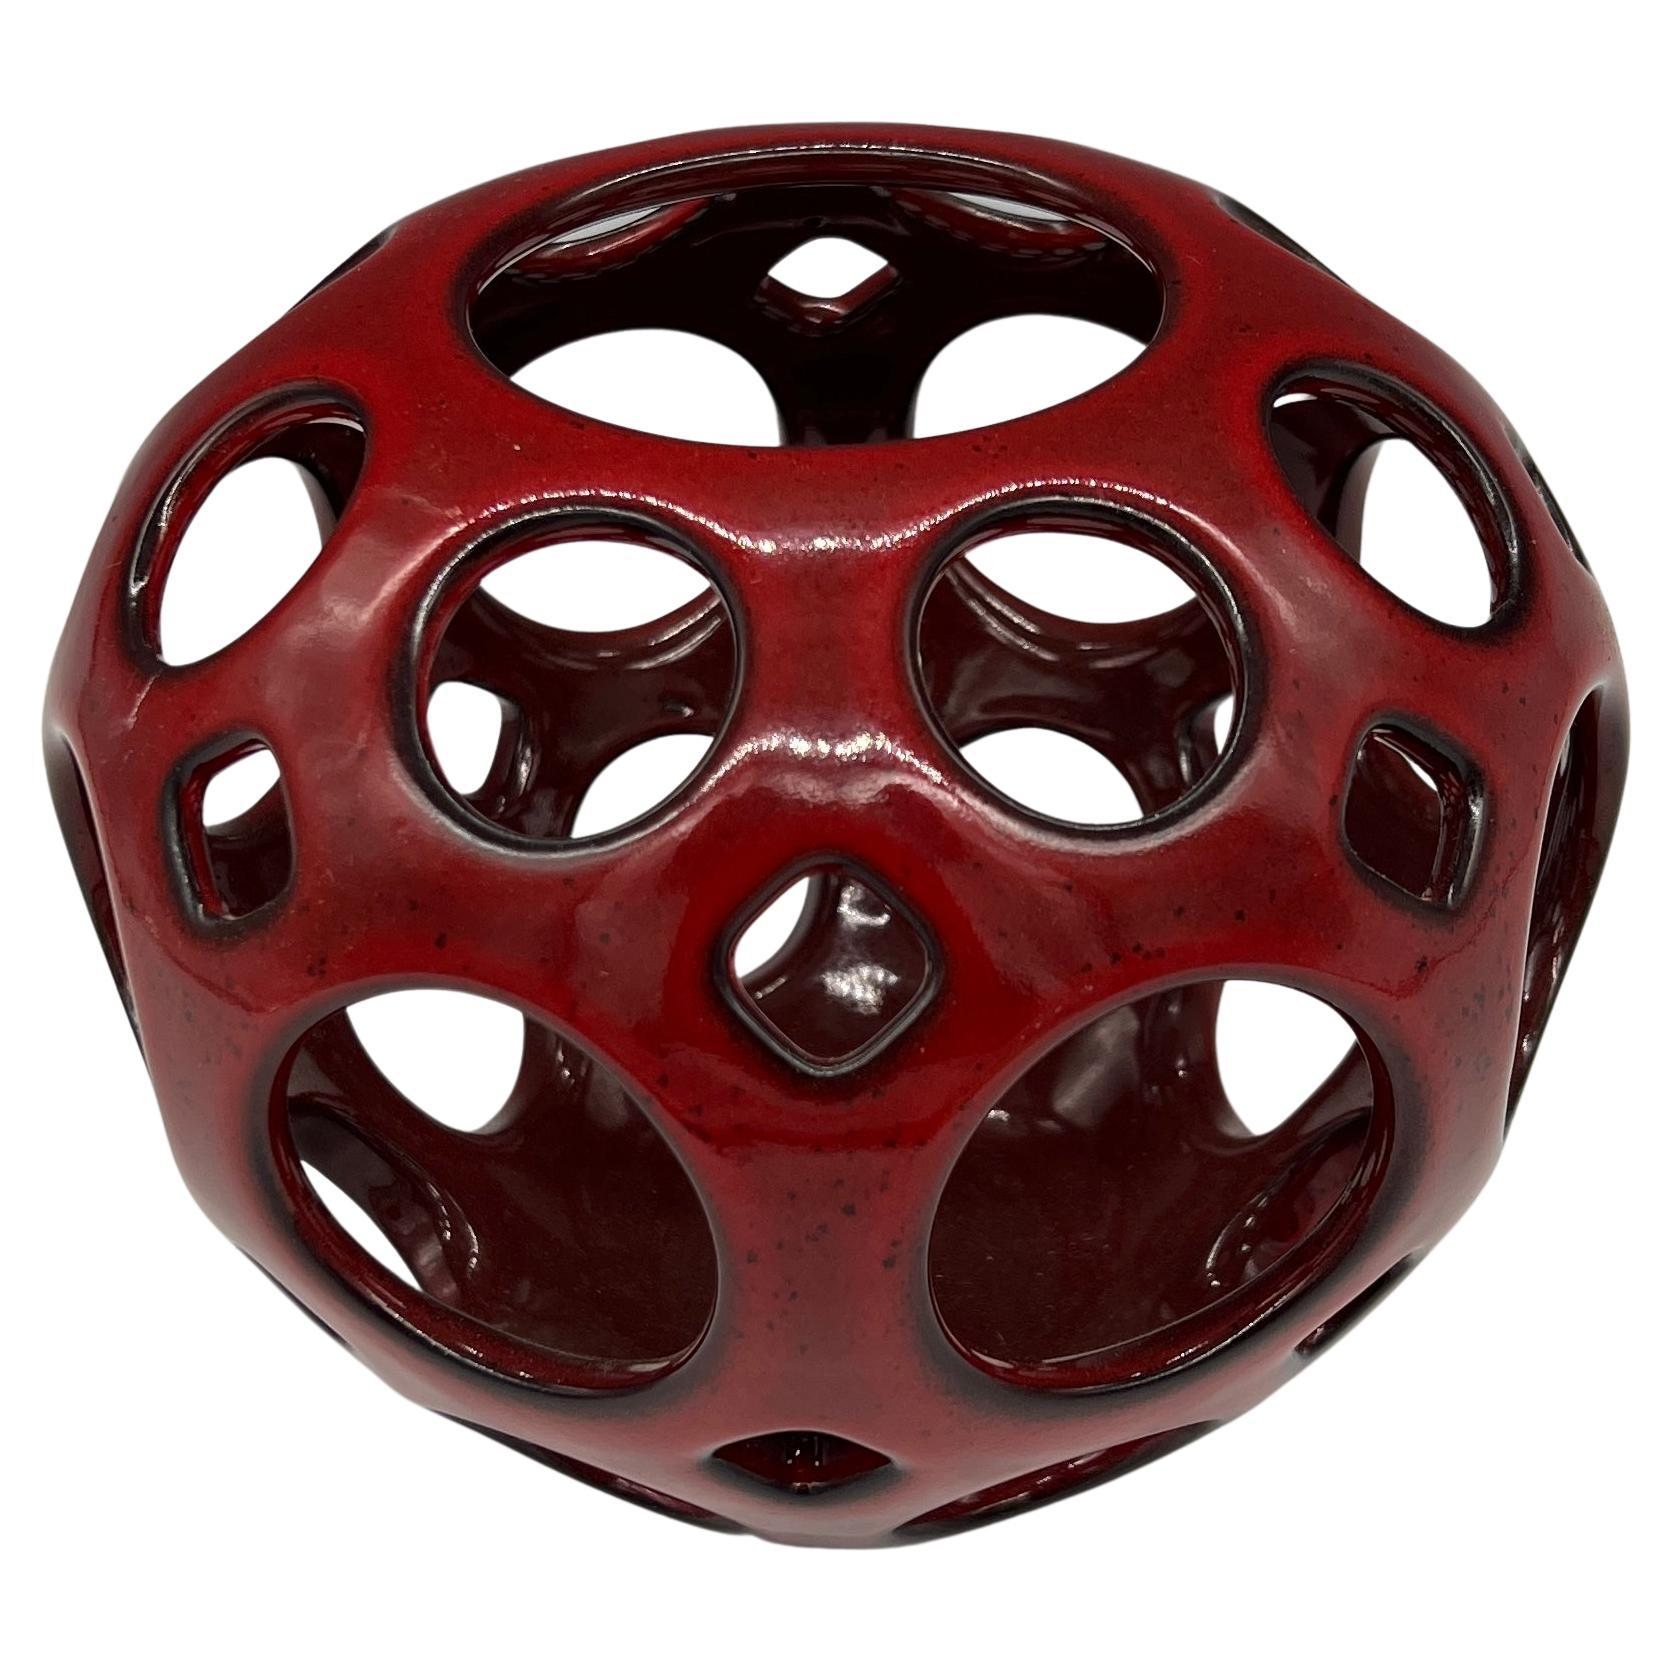 Red and Black Tabletop Candleholder For Sale